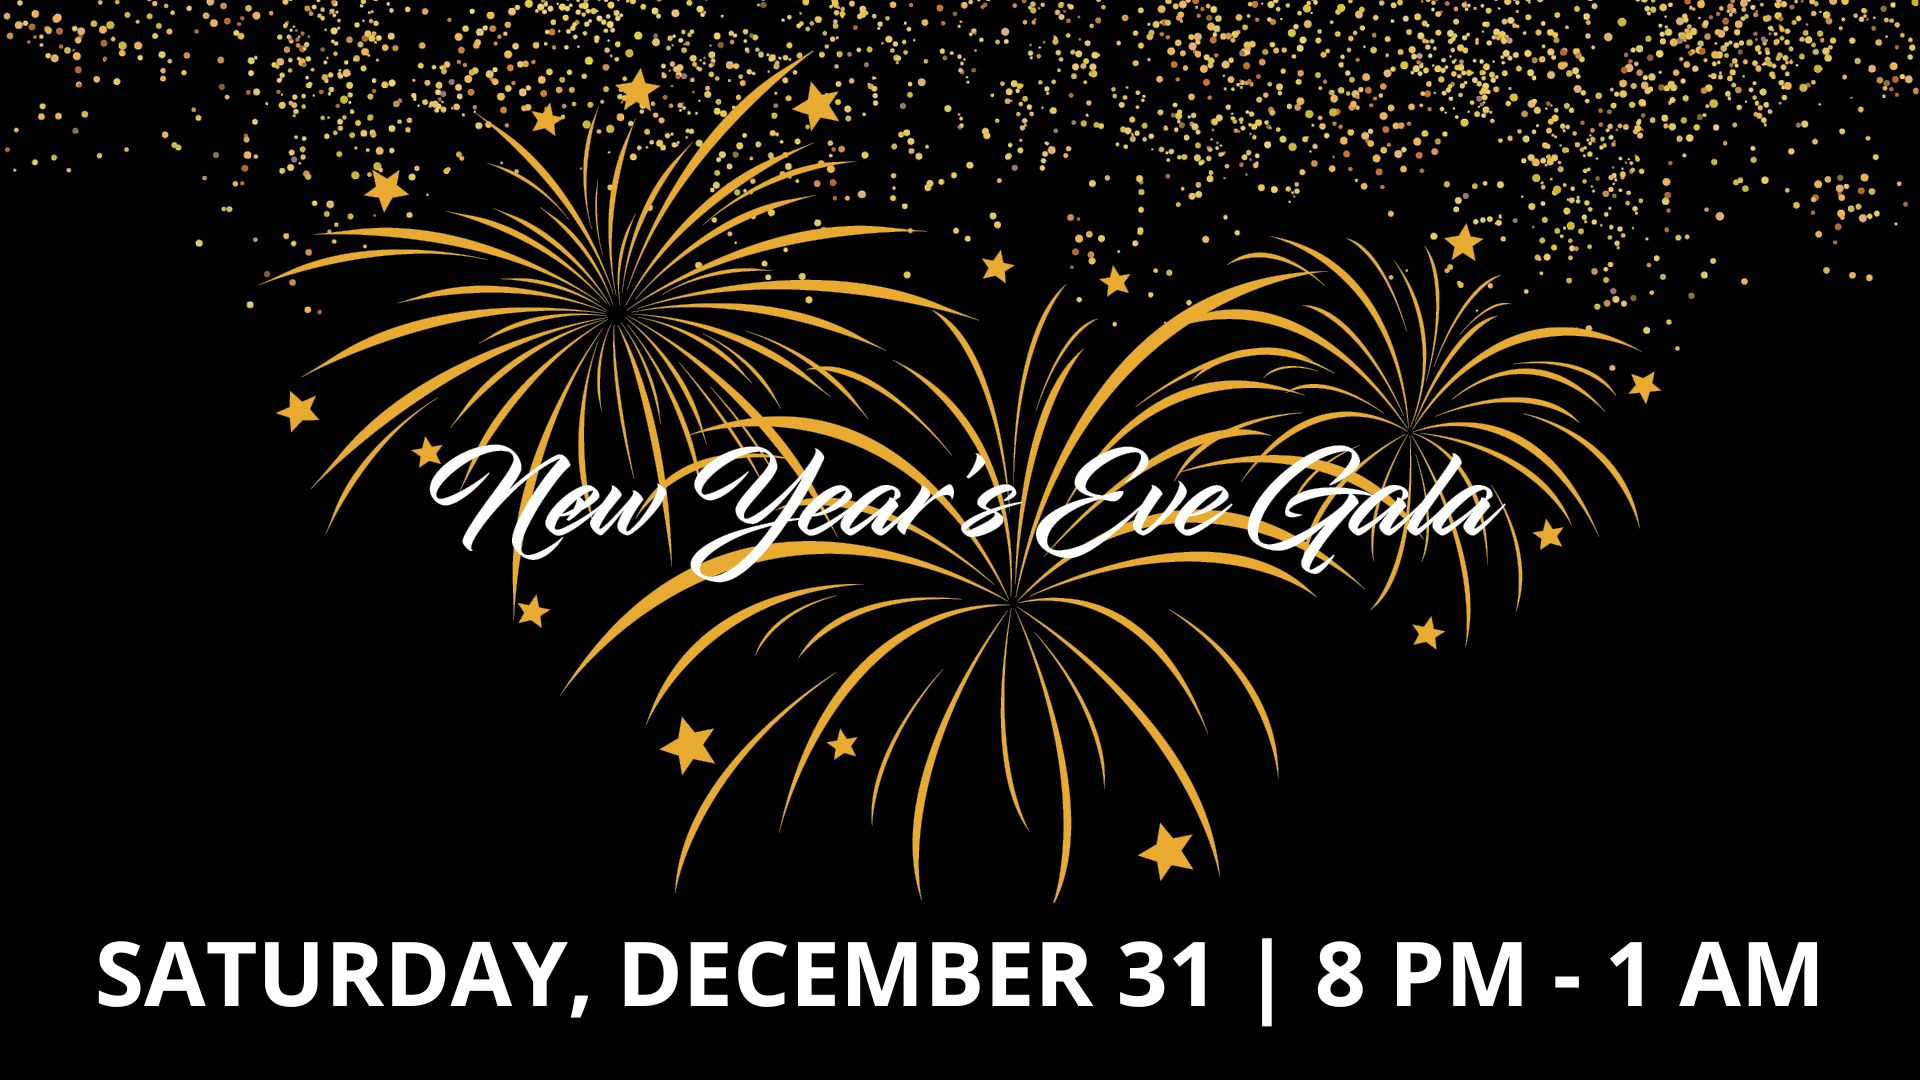 New Year's Eve Gala at Bismarck Event Center